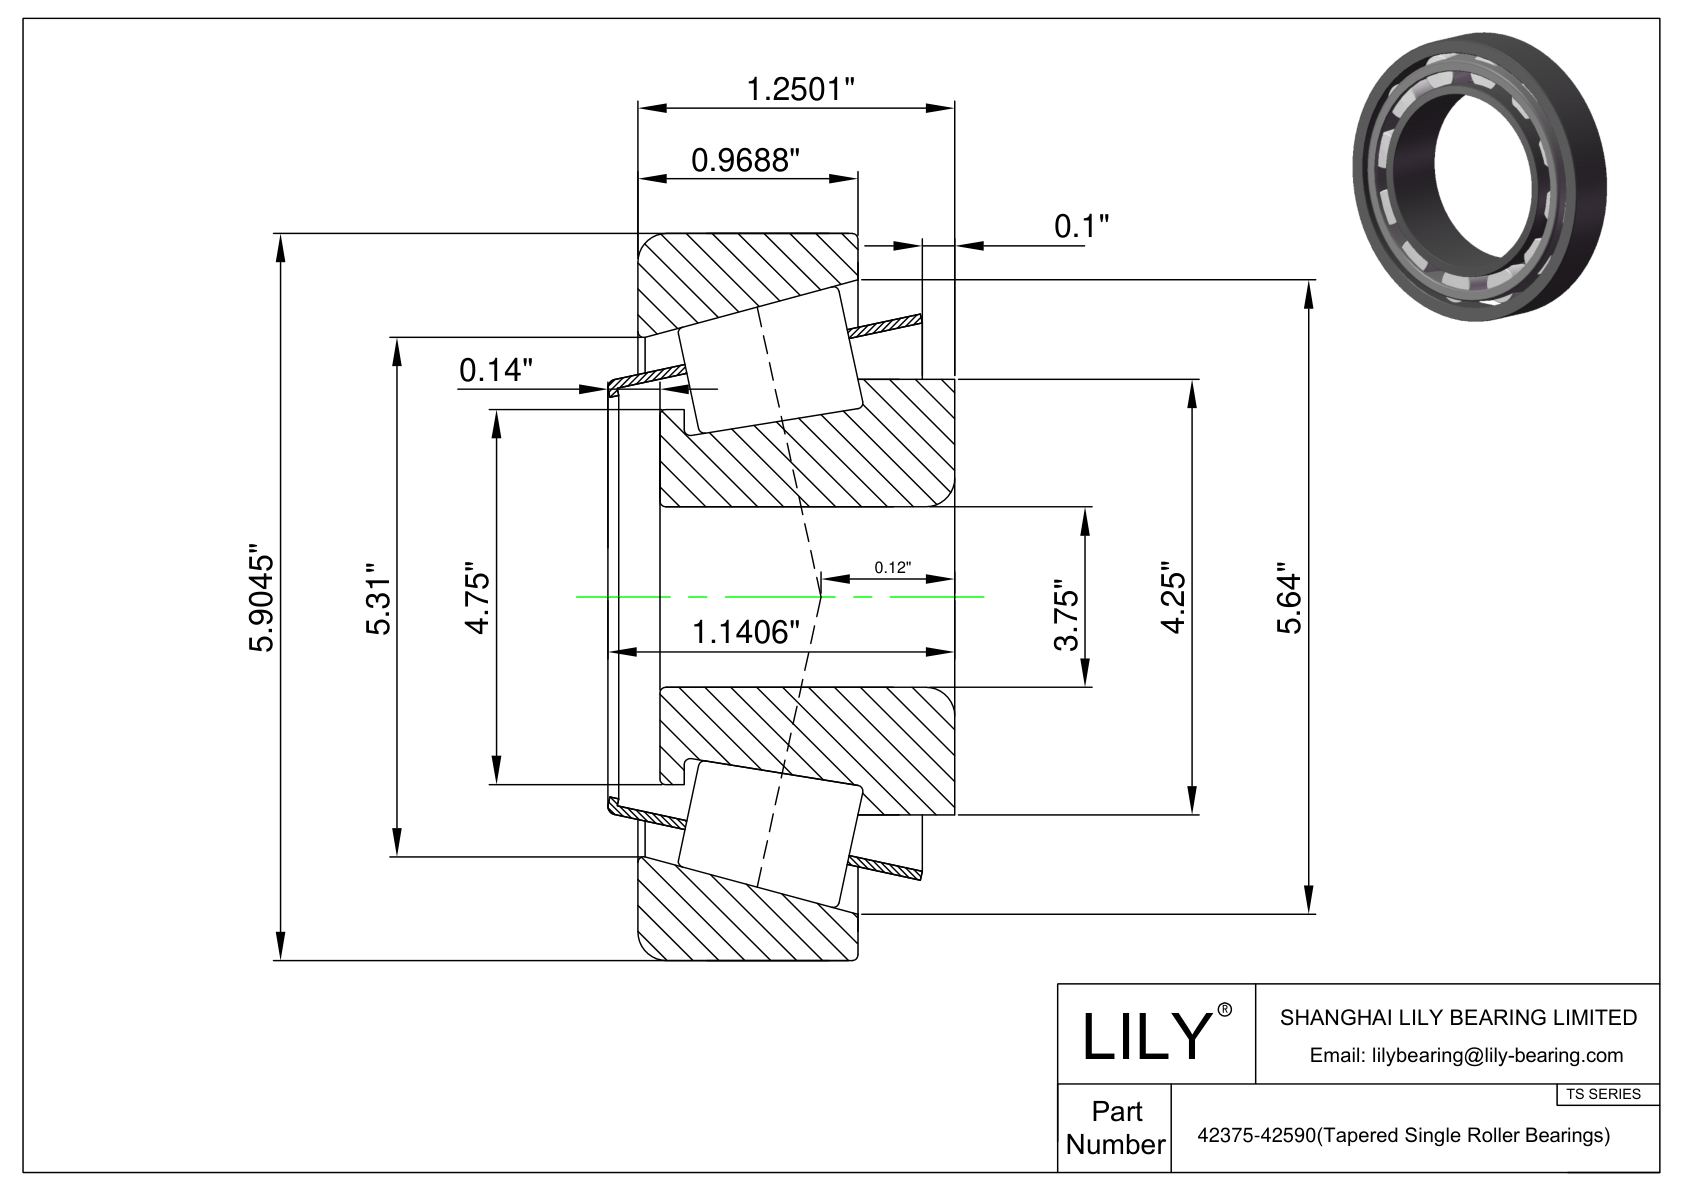 42375-42590 TS (Tapered Single Roller Bearings) (Imperial) cad drawing